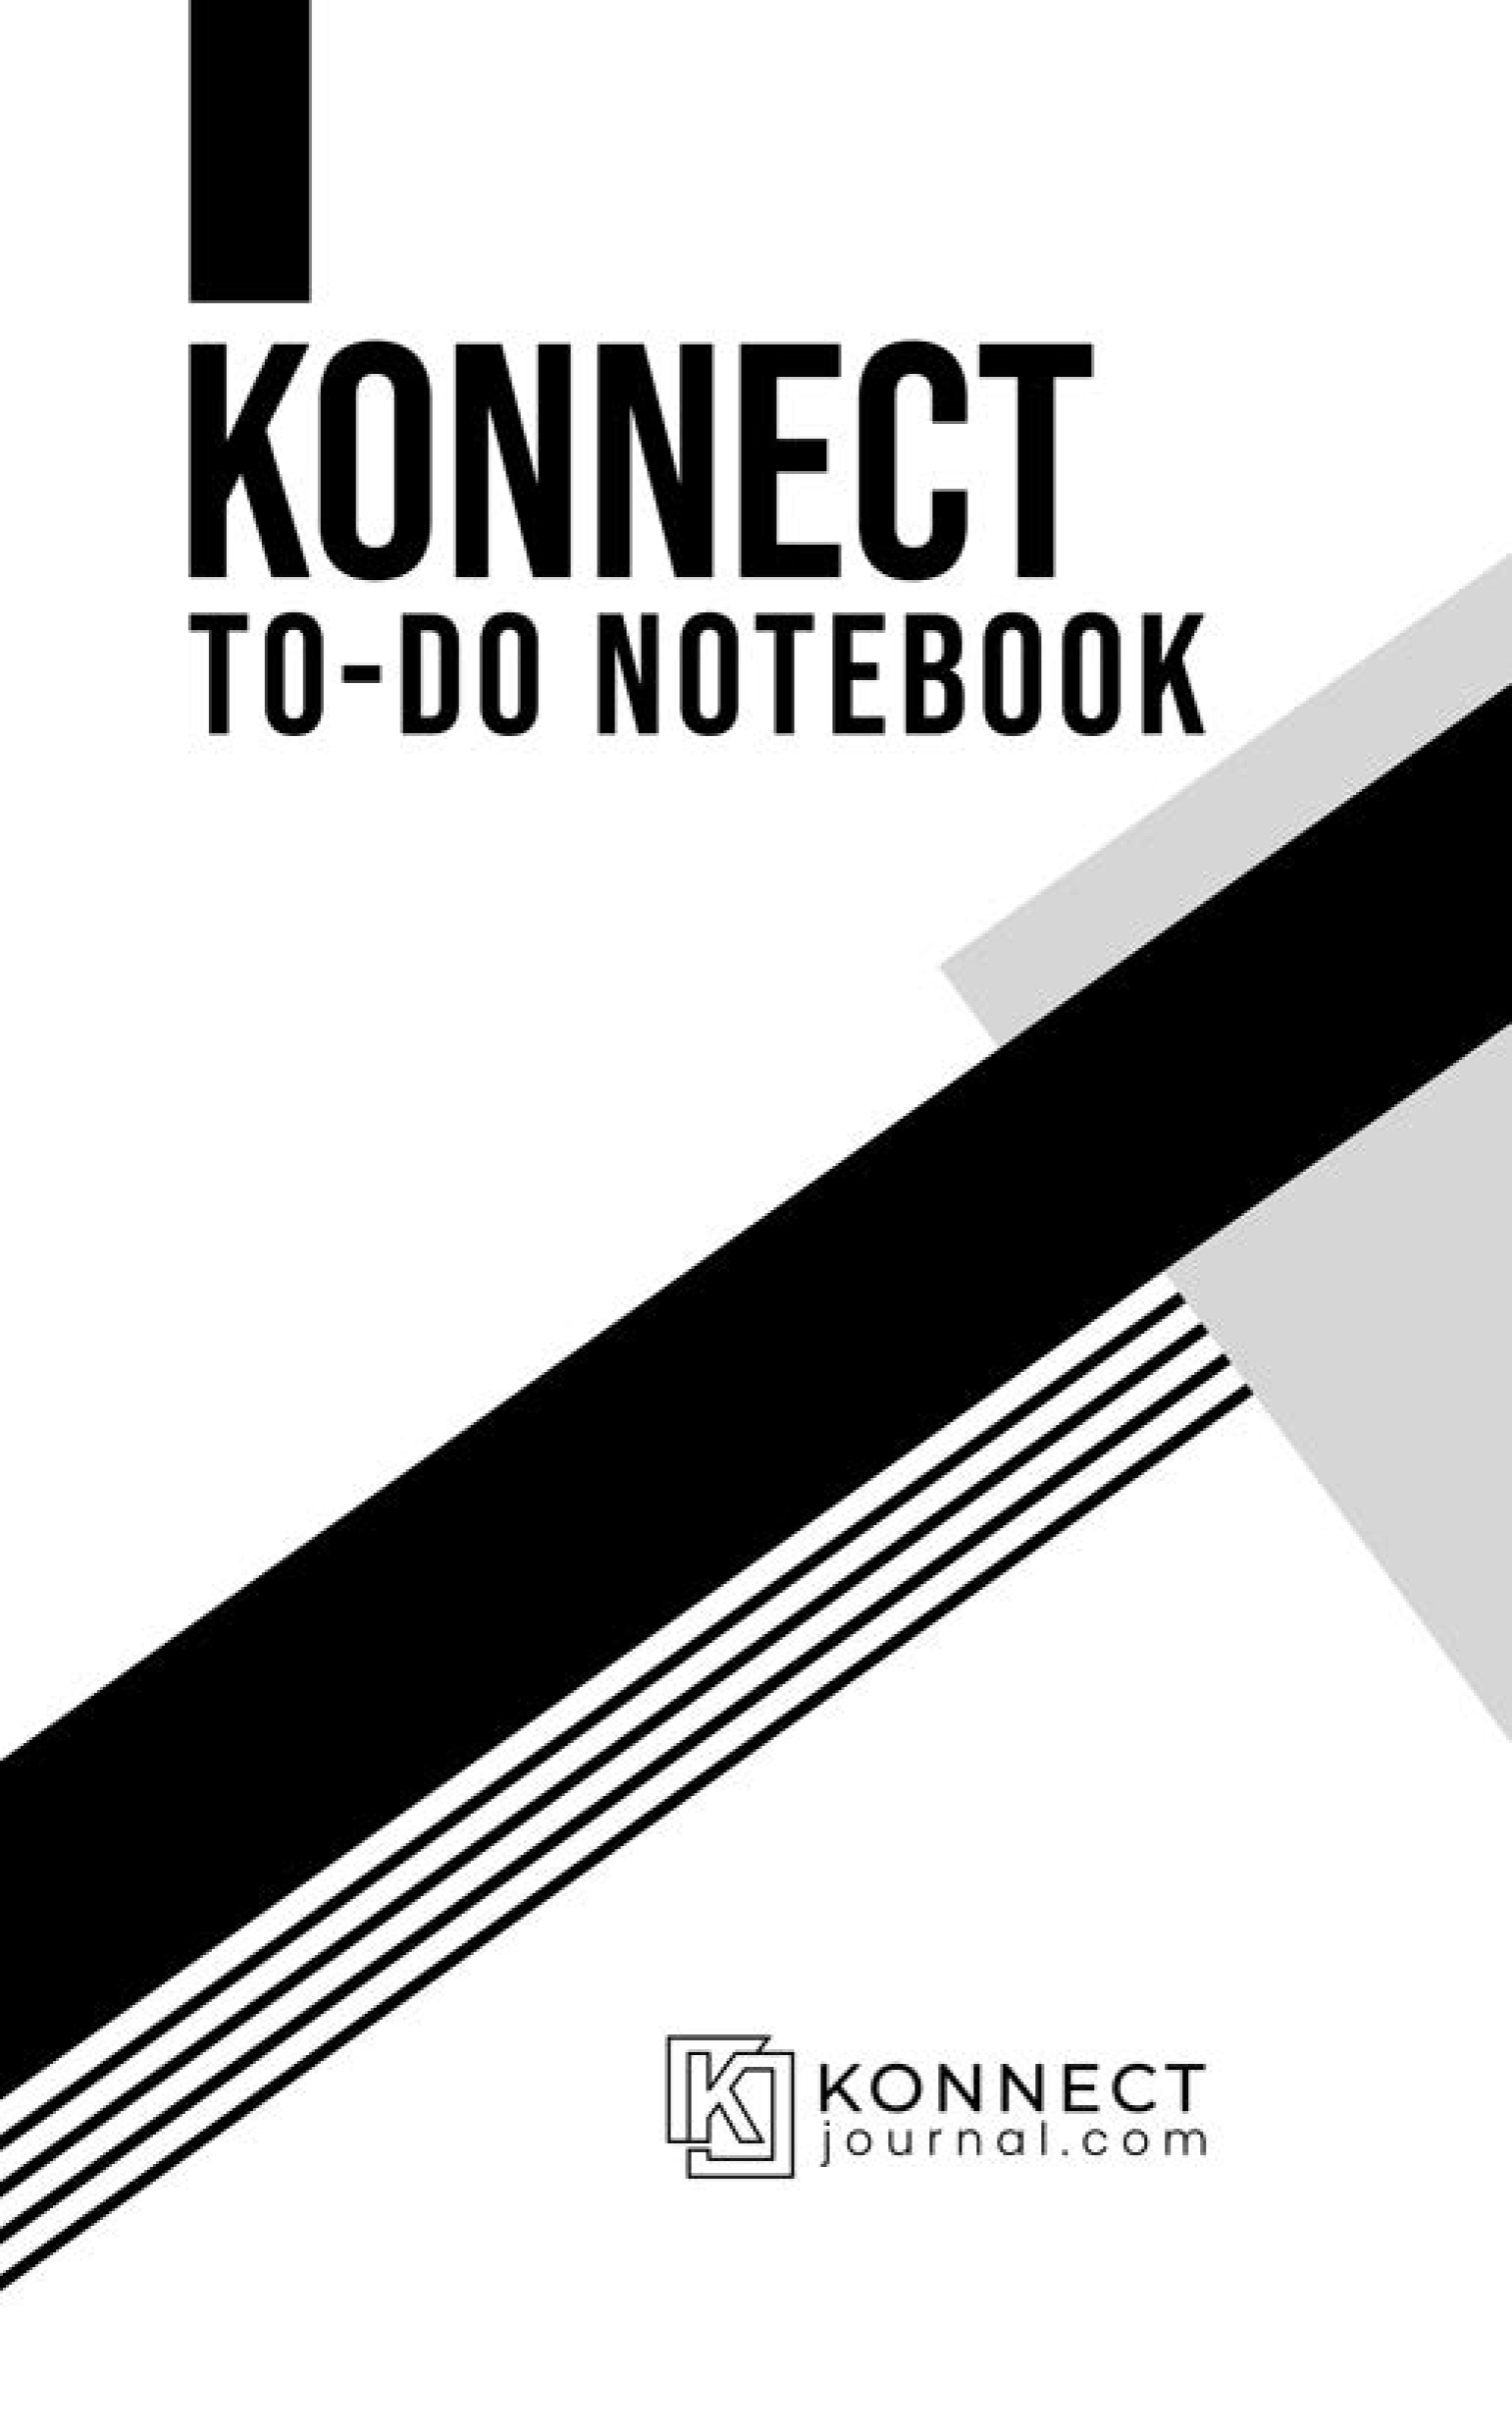 Konnect To-Do Notebook cover page